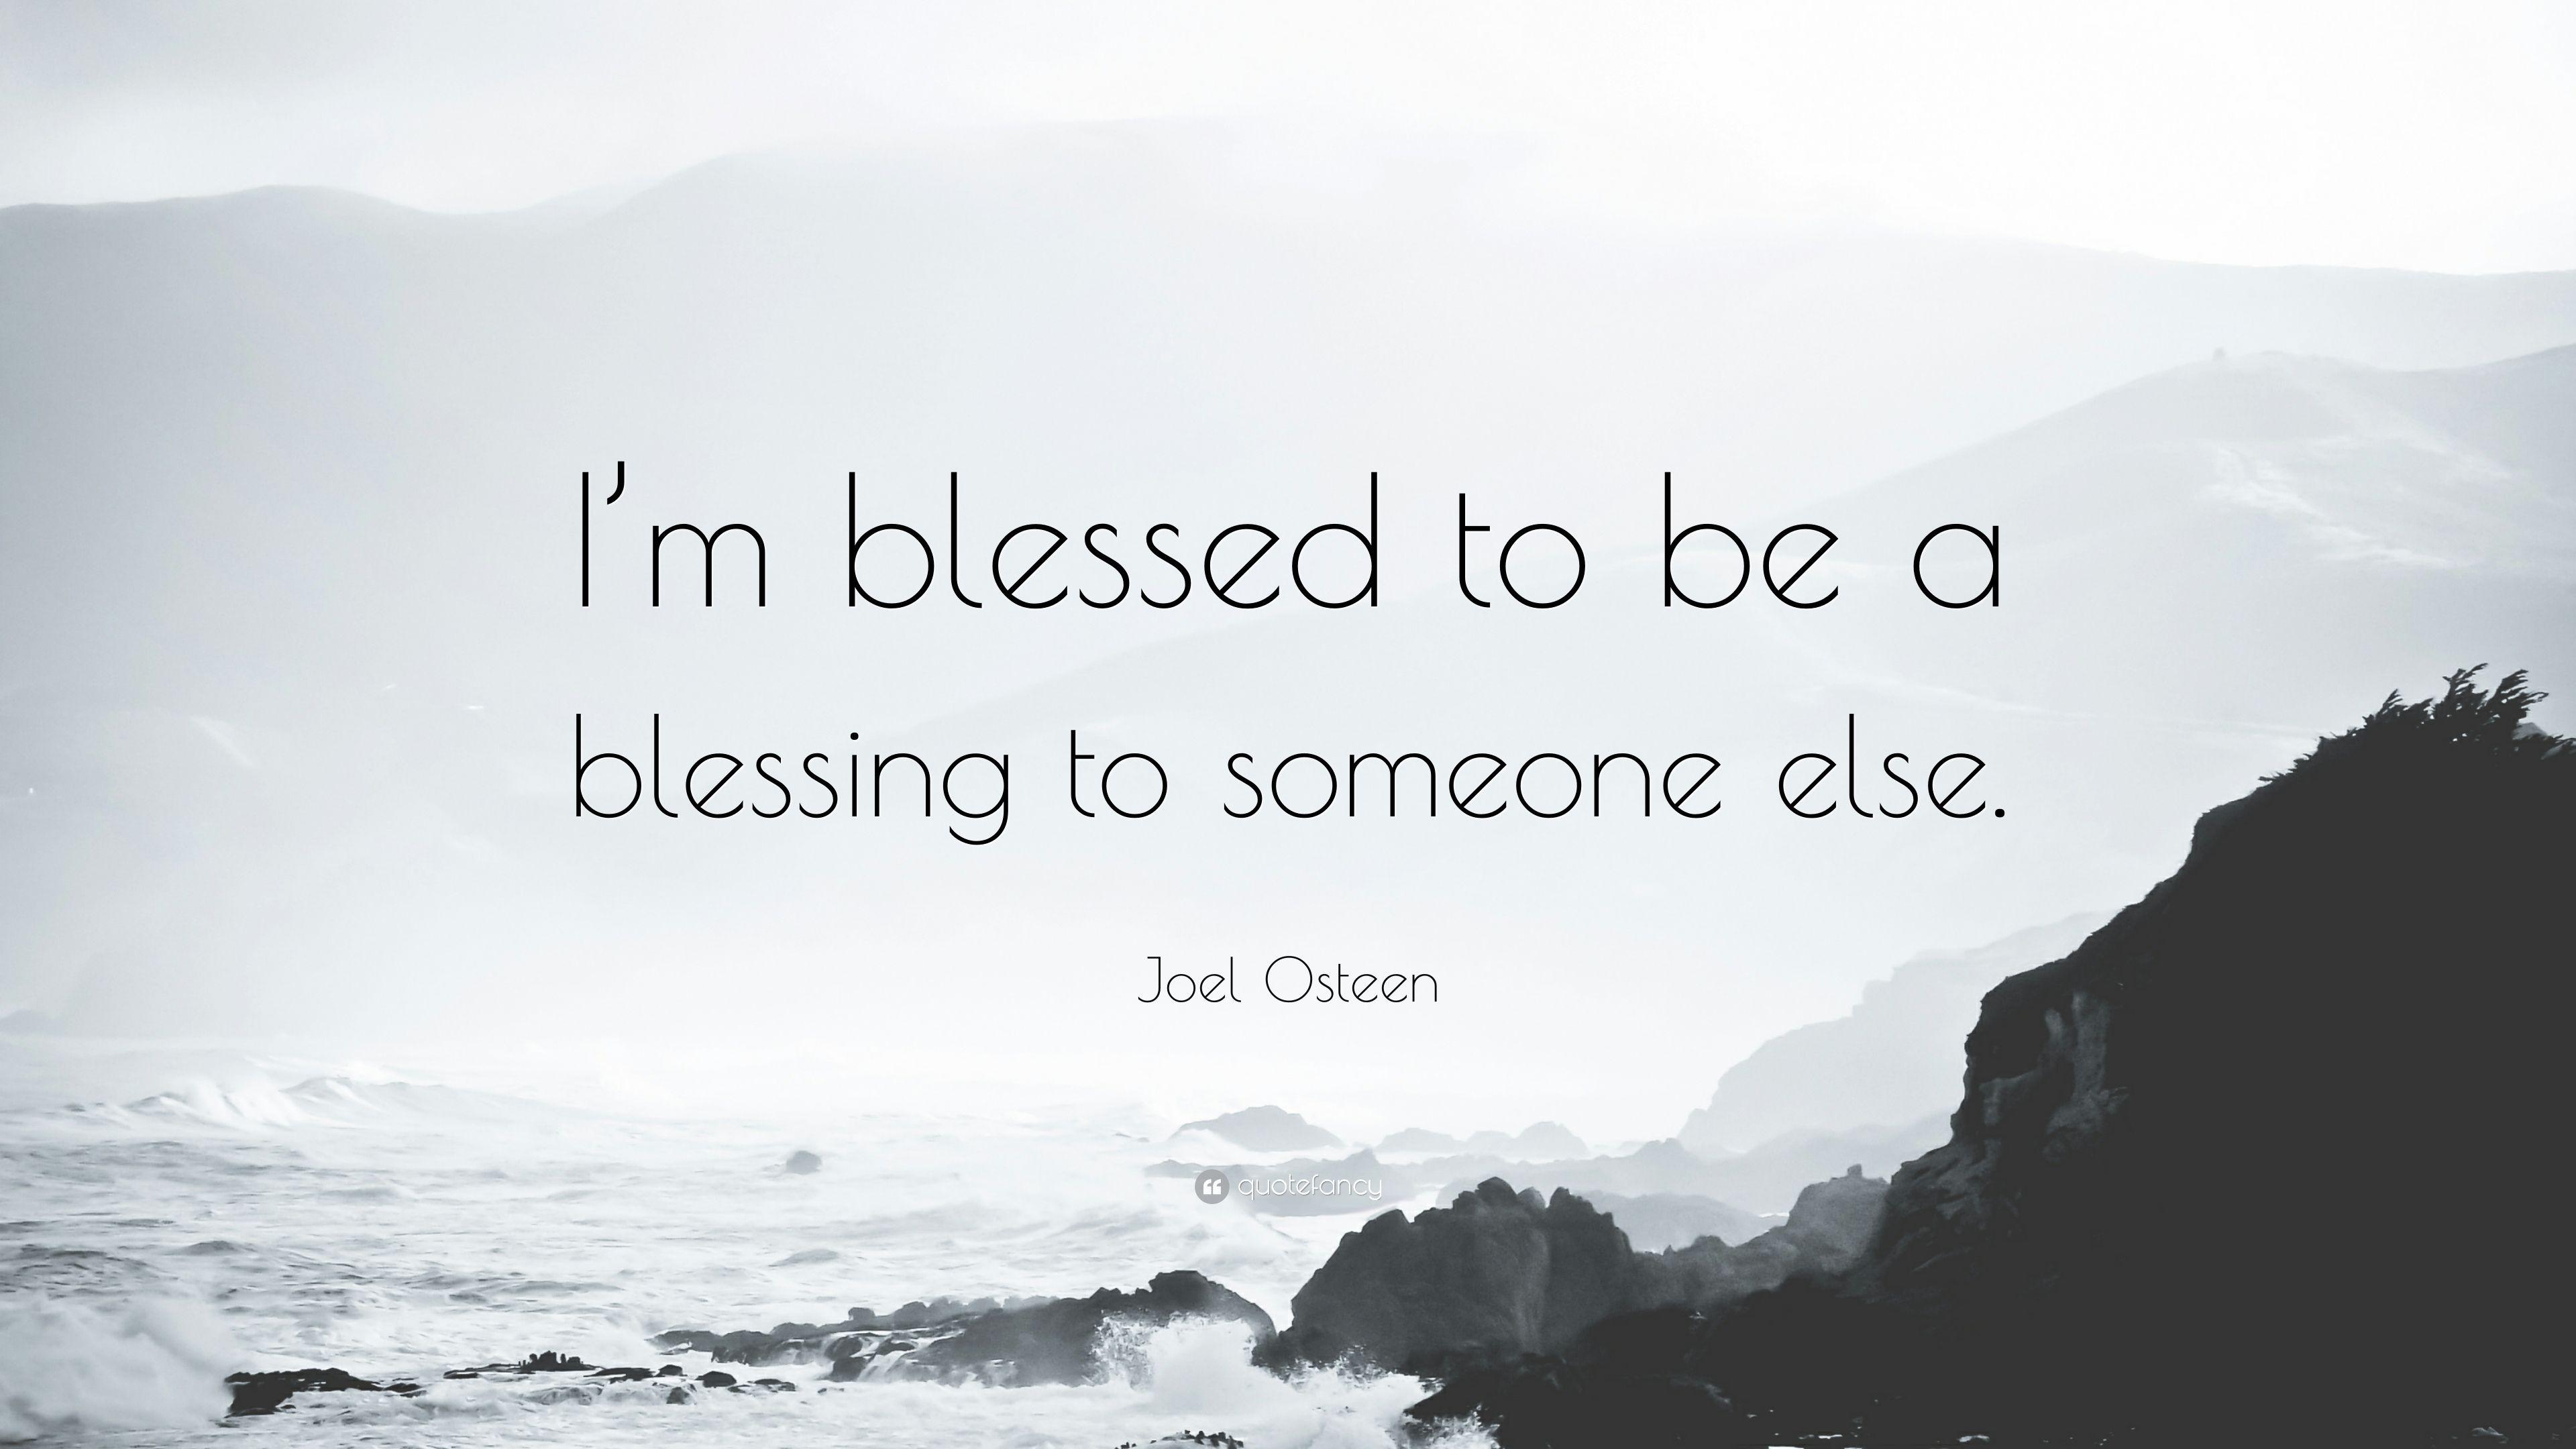 Joel Osteen Quote: “I'm blessed to be a blessing to someone else